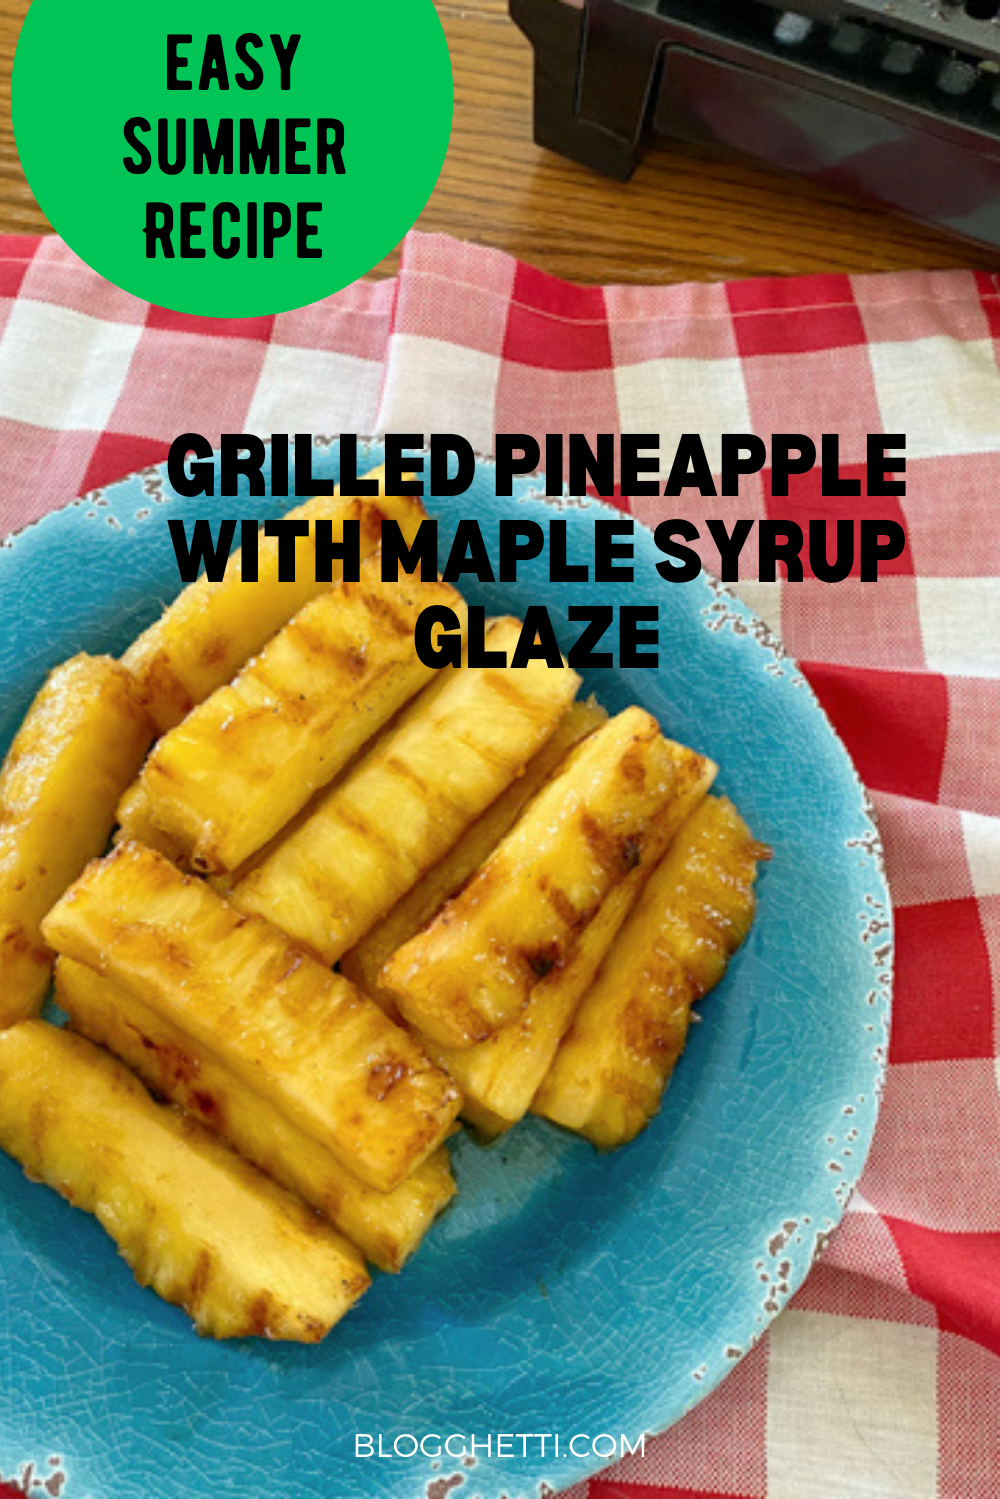 grilled pineapple with maple glaze image with text overlay